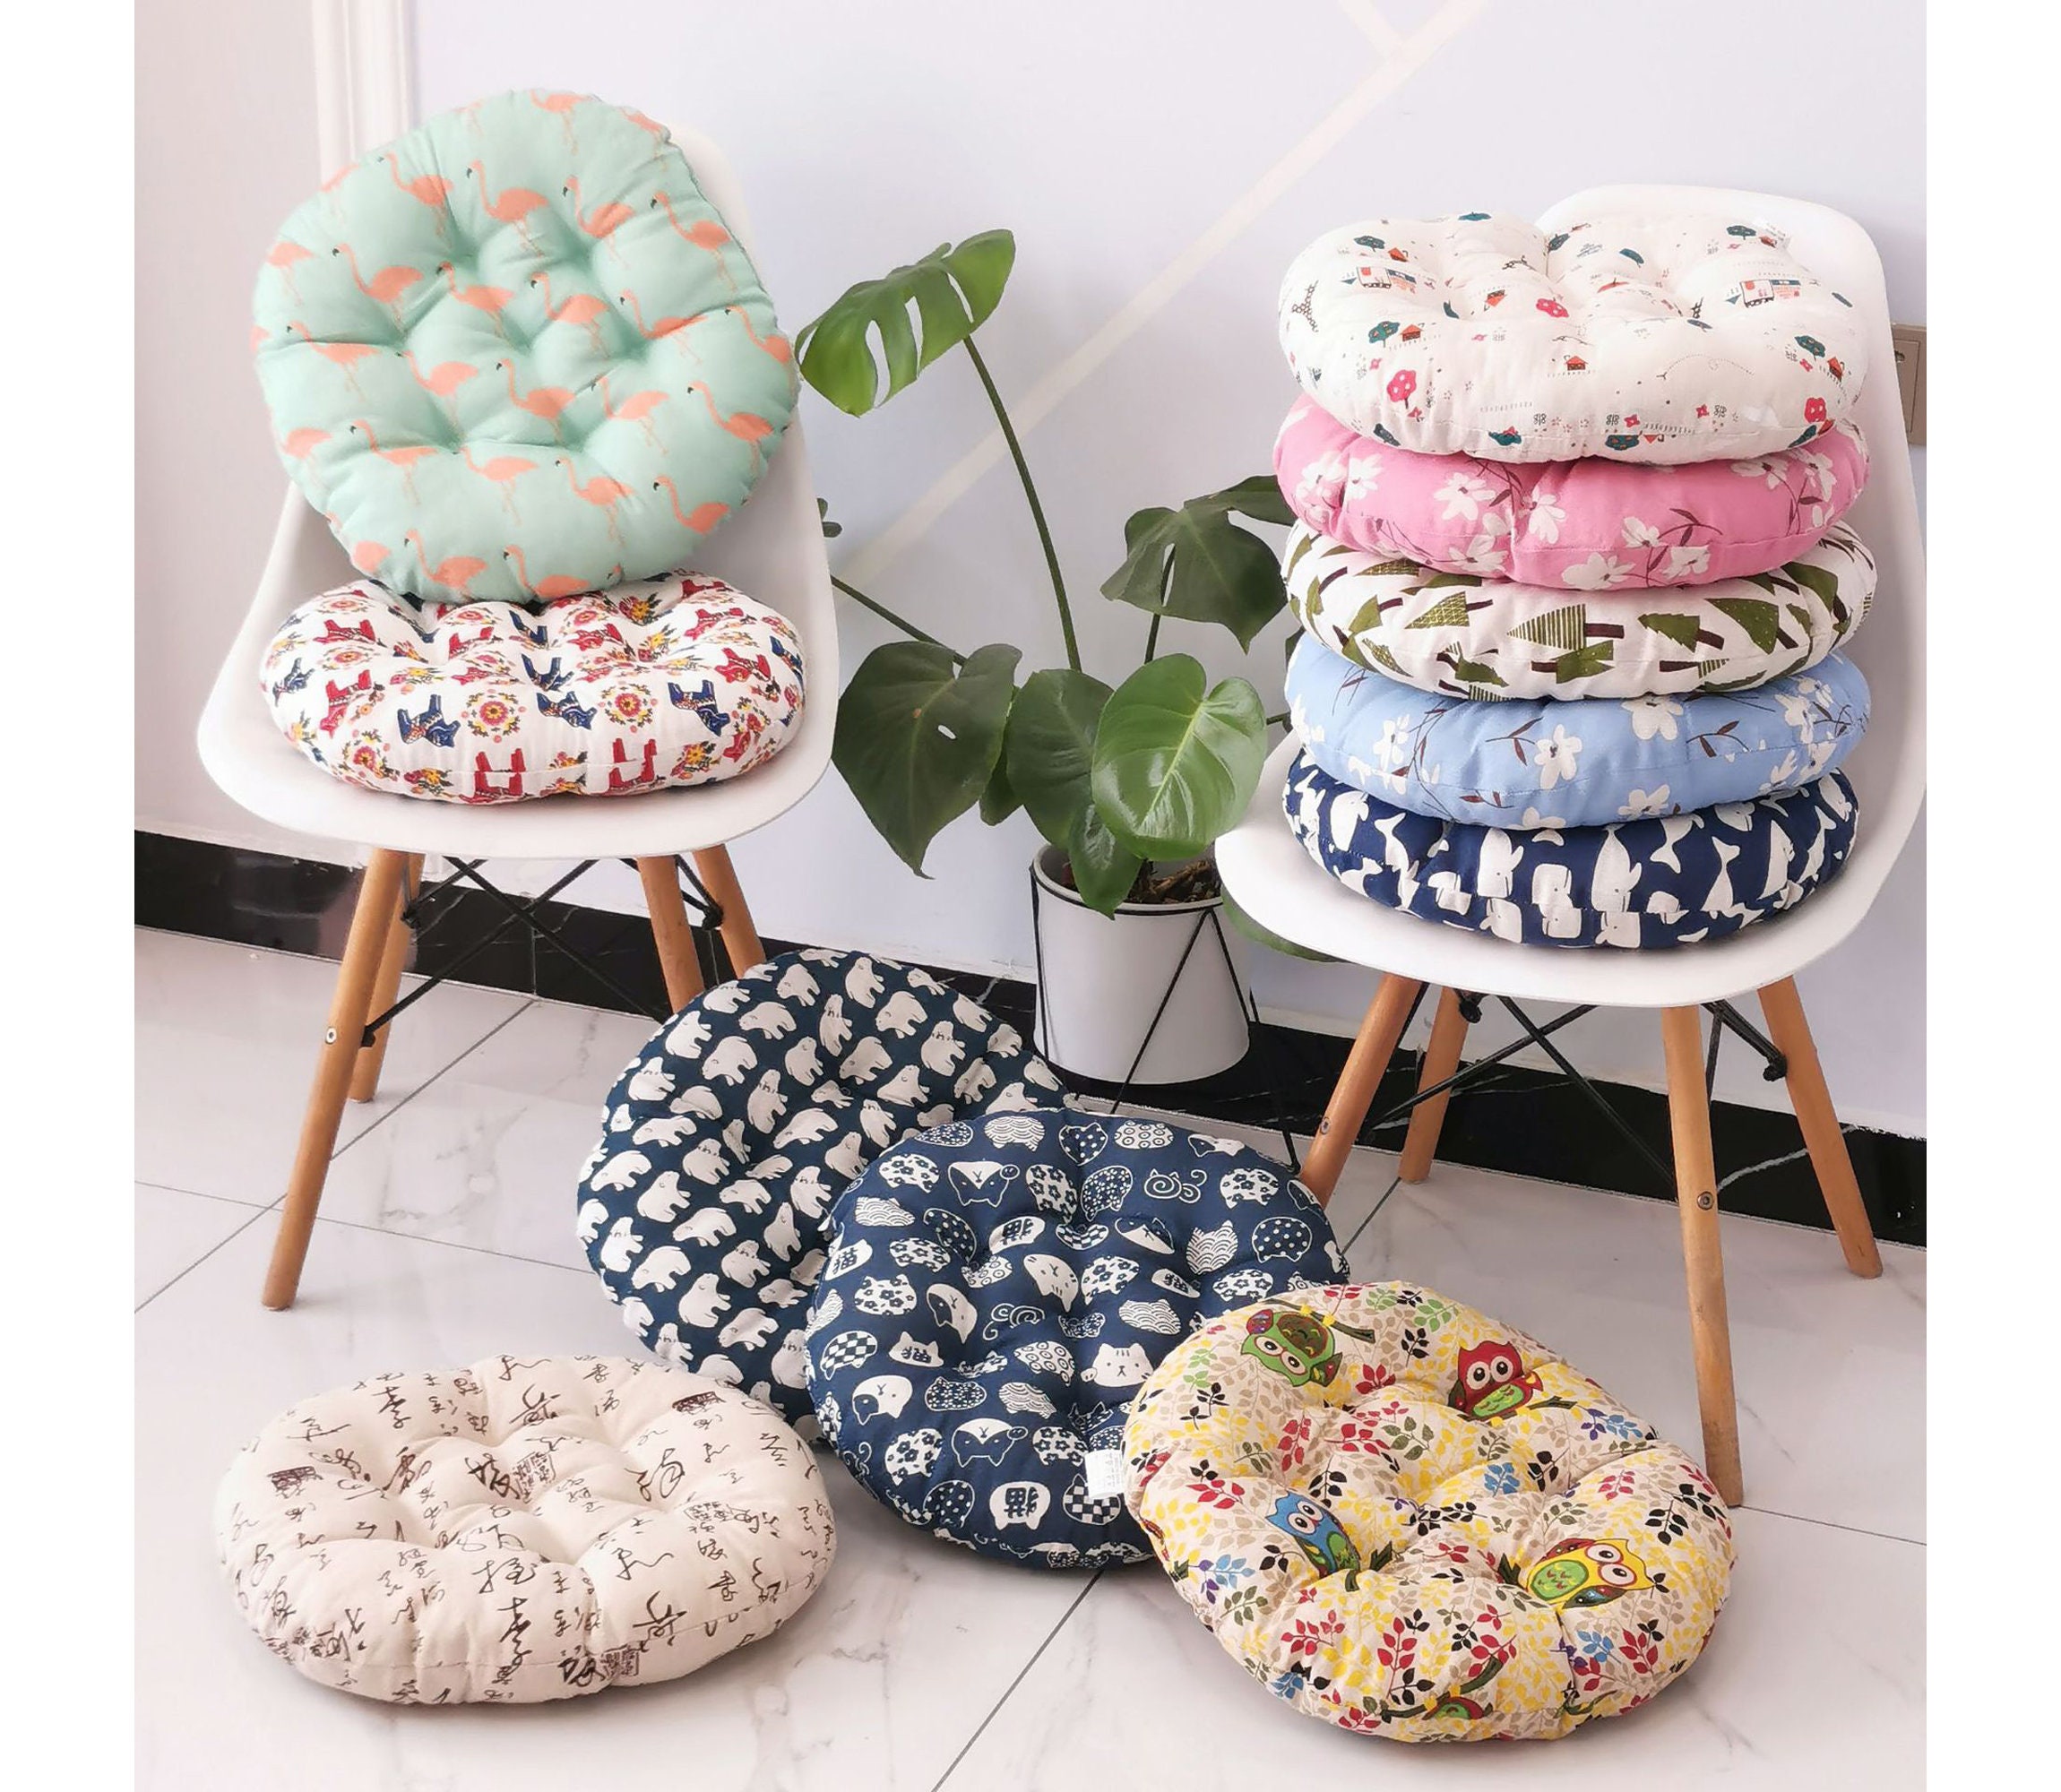 21 Colors Square Chair Cushion Pad/16 18 20 Thicken Cotton Linen Seat  Cushion Meditation Chair Pad for Chairs/patio Dinning Cushion Poufs 